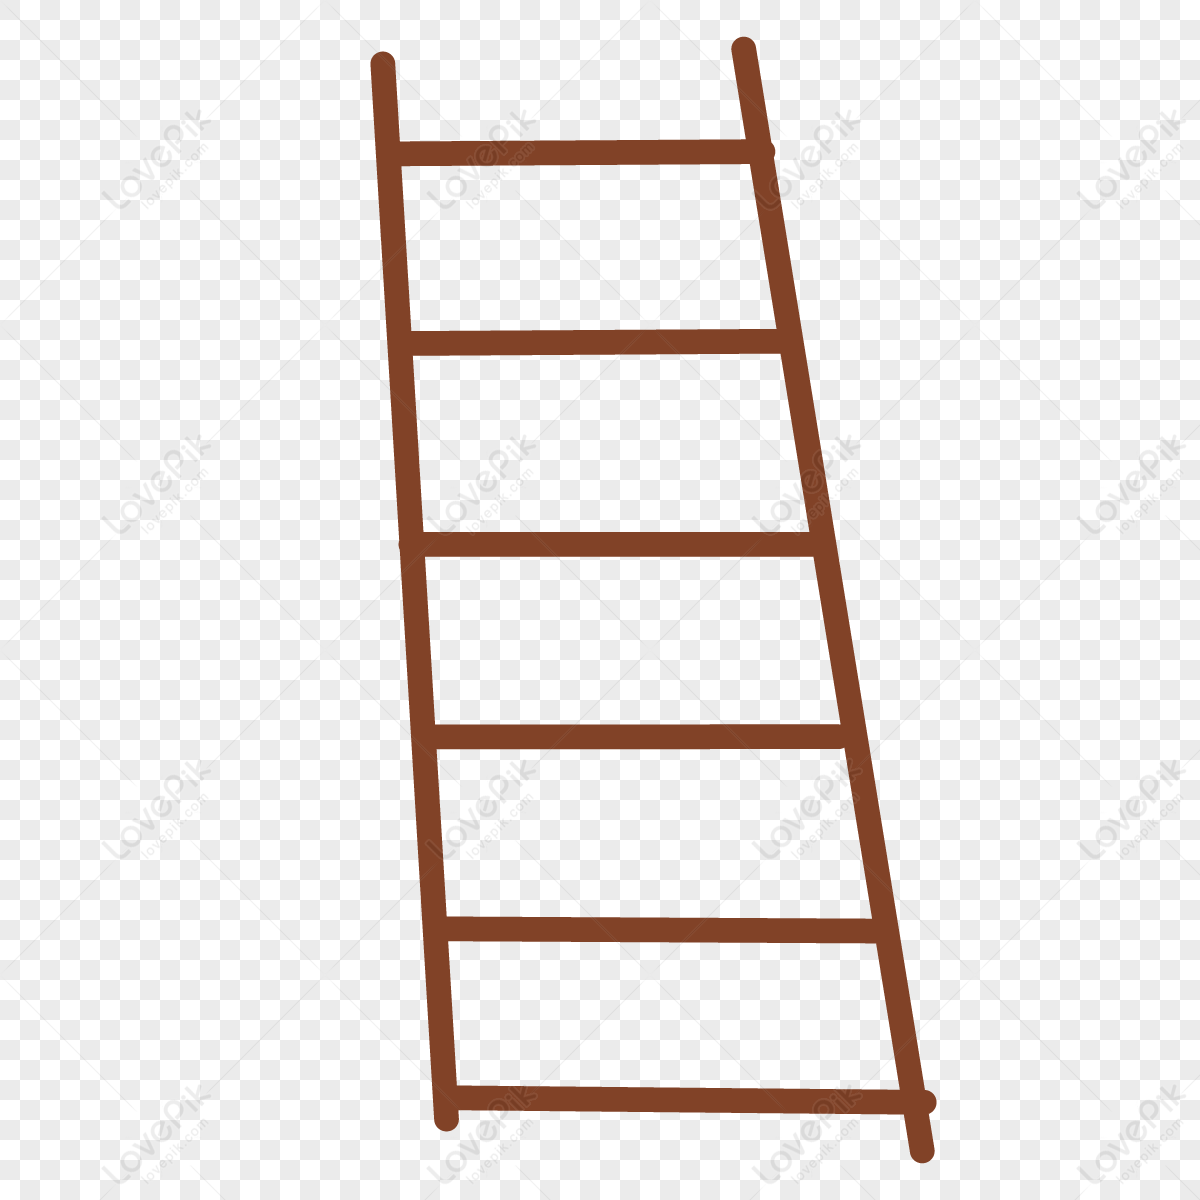 Ladder PNG Image And Clipart Image For Free Download - Lovepik | 400173548